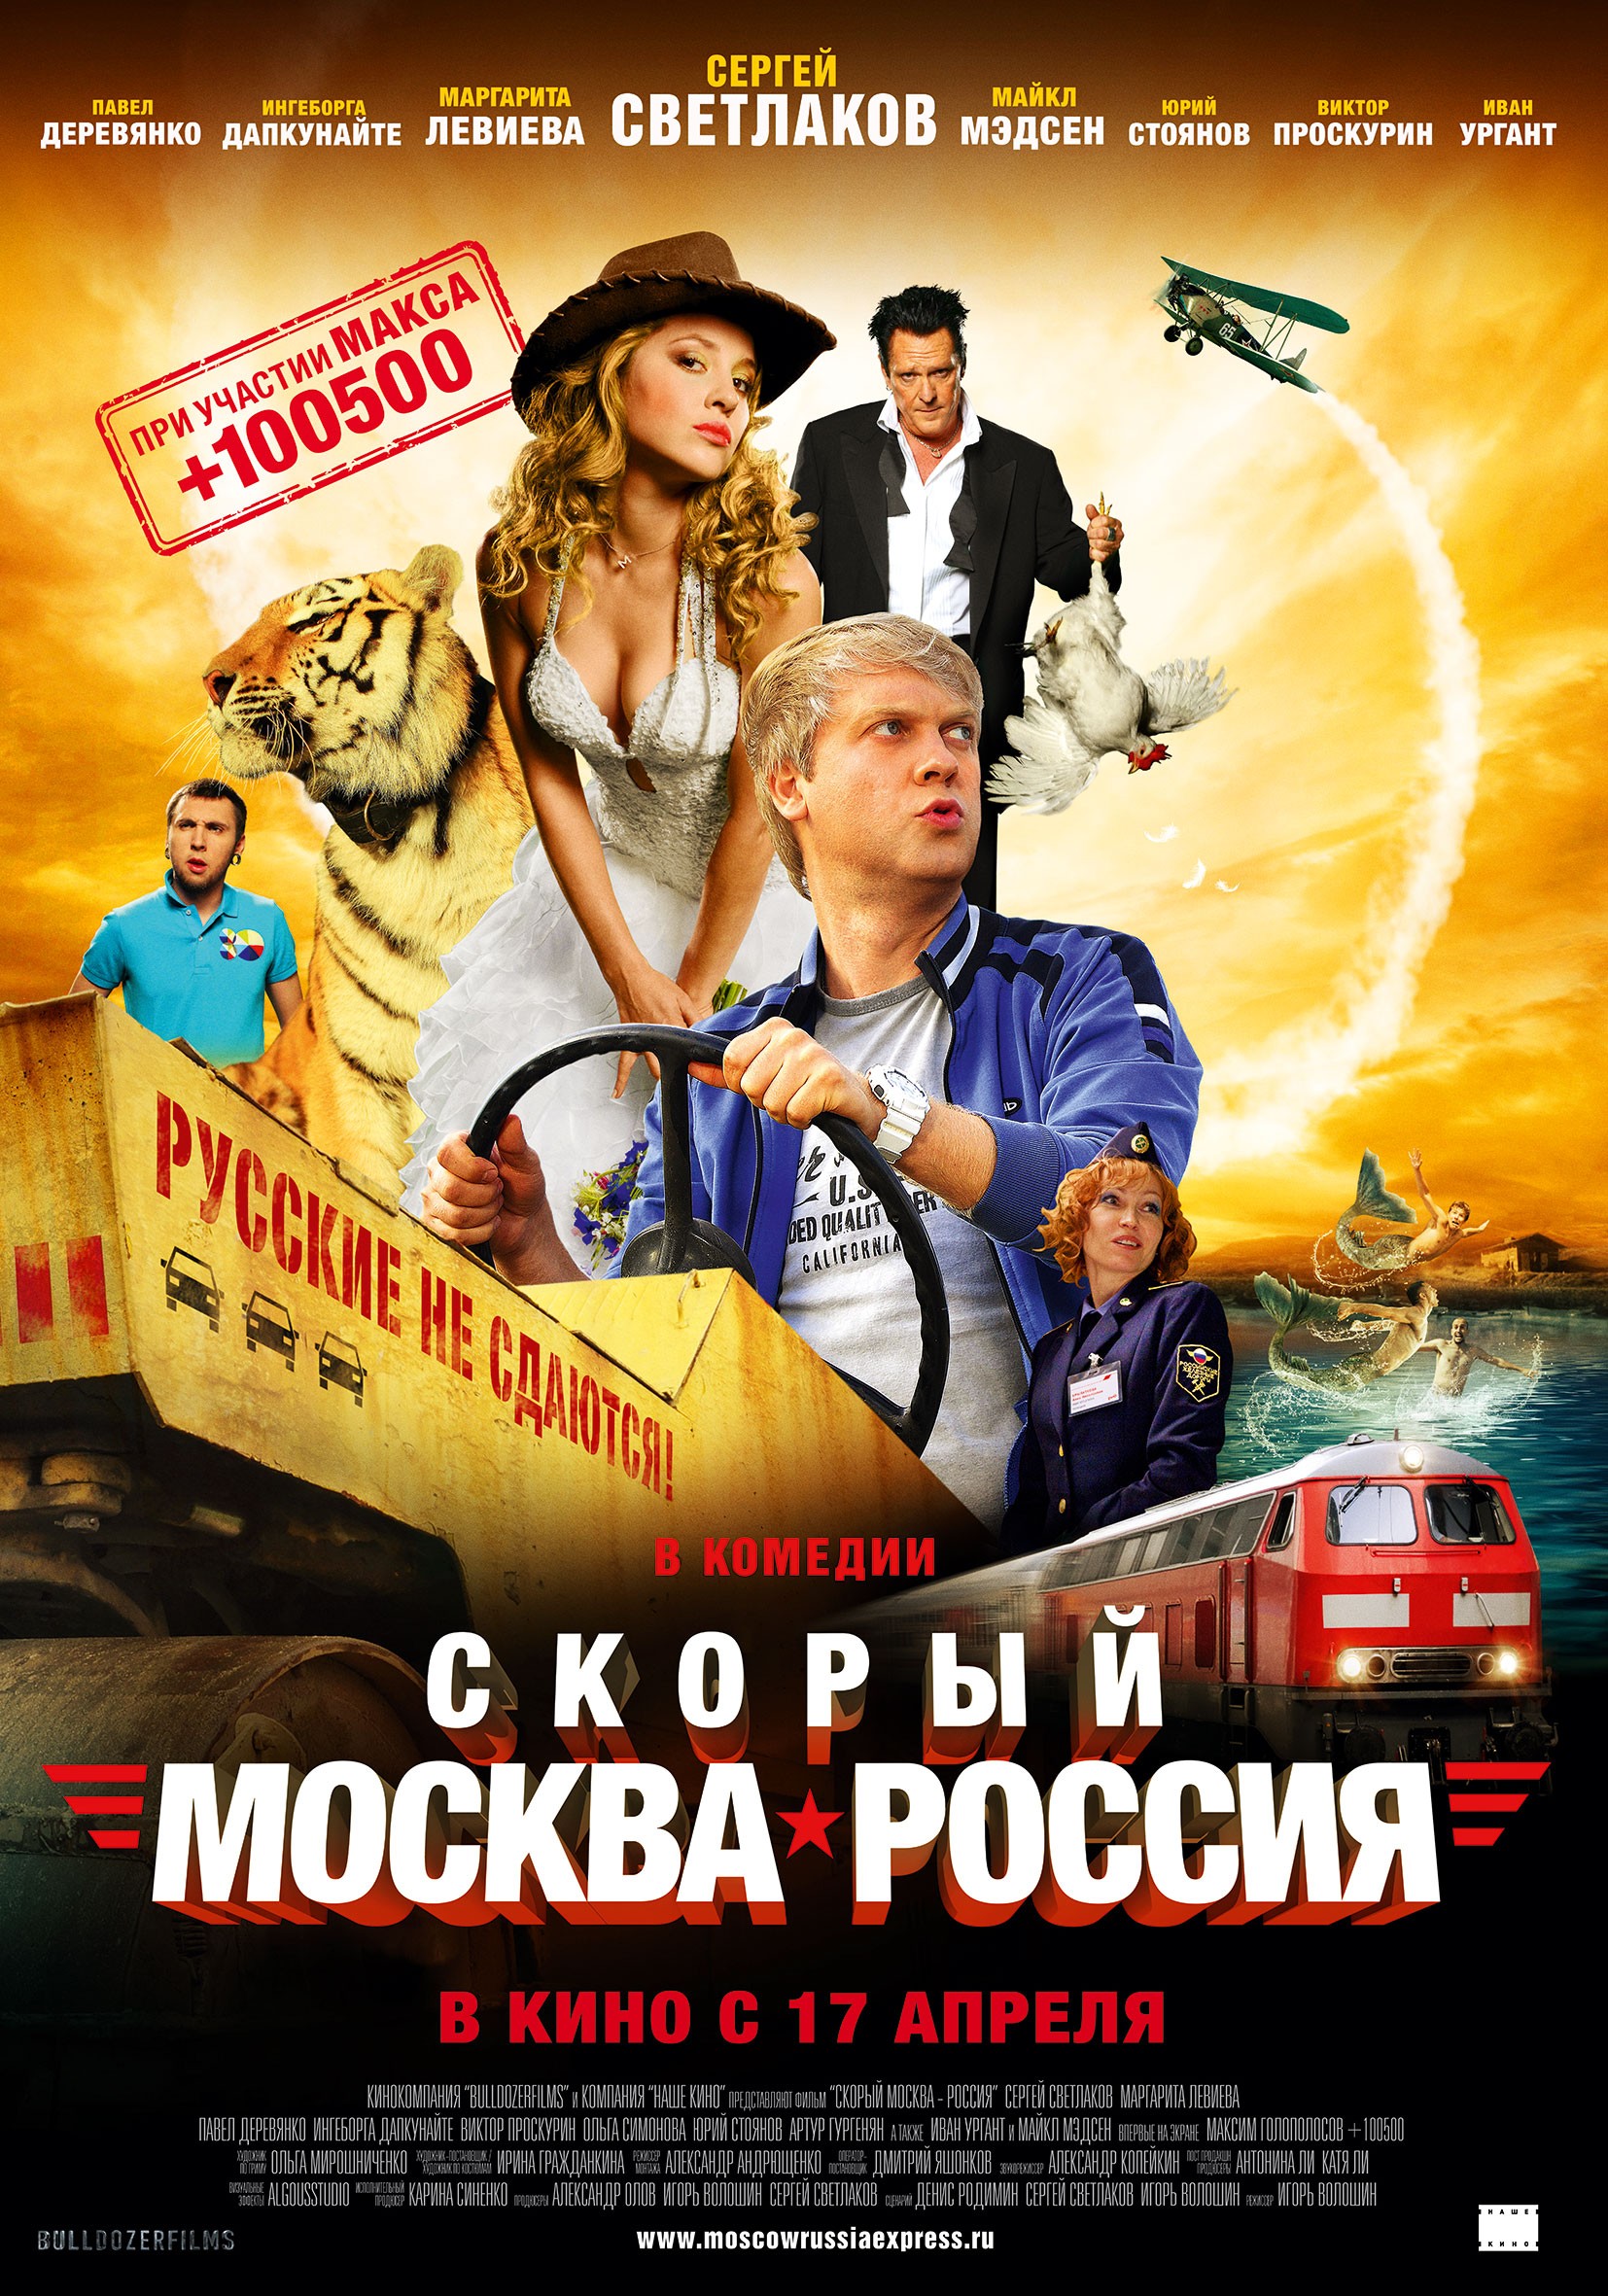 Mega Sized Movie Poster Image for Moscow-Russia Express 